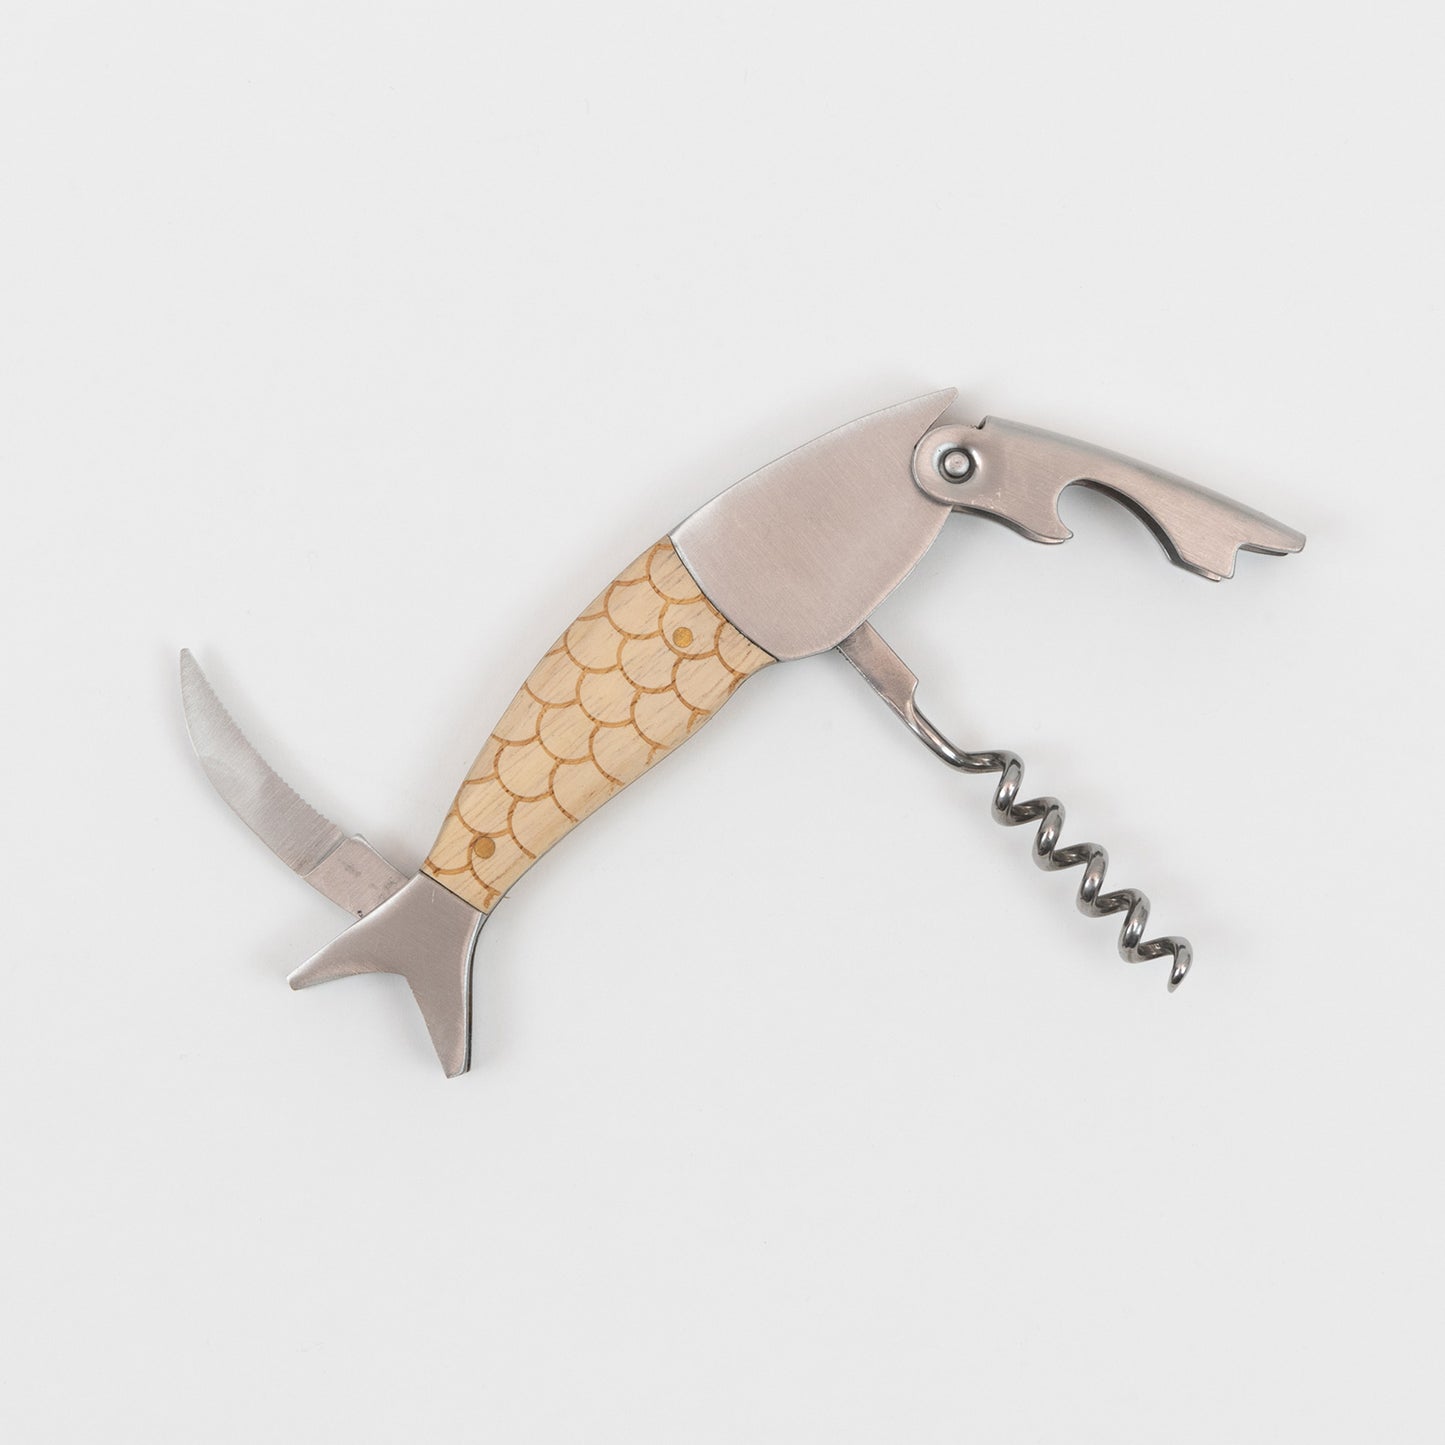 Top down view of the metal and wood fish bottle opener with the cork screw, bottle cap and pen knife on display.